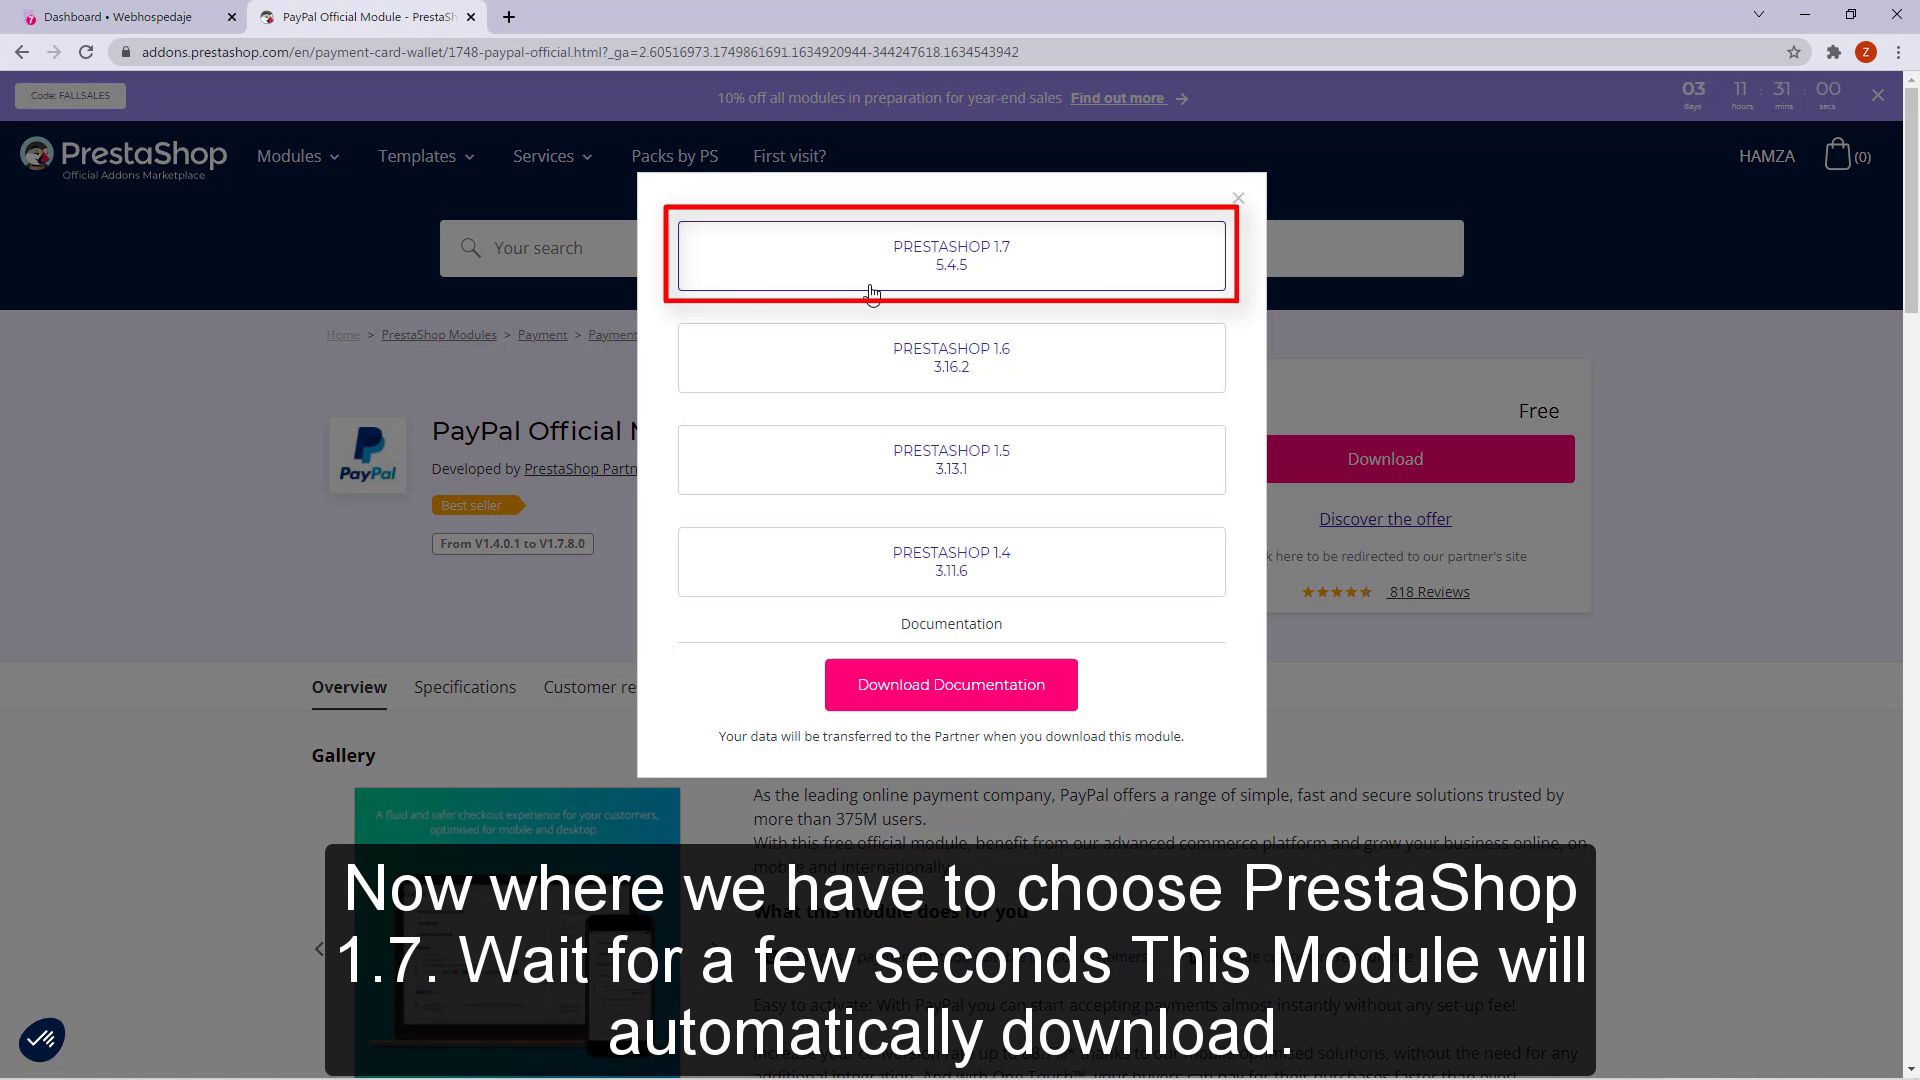 Now where we have to choose PrestaShop 1.7